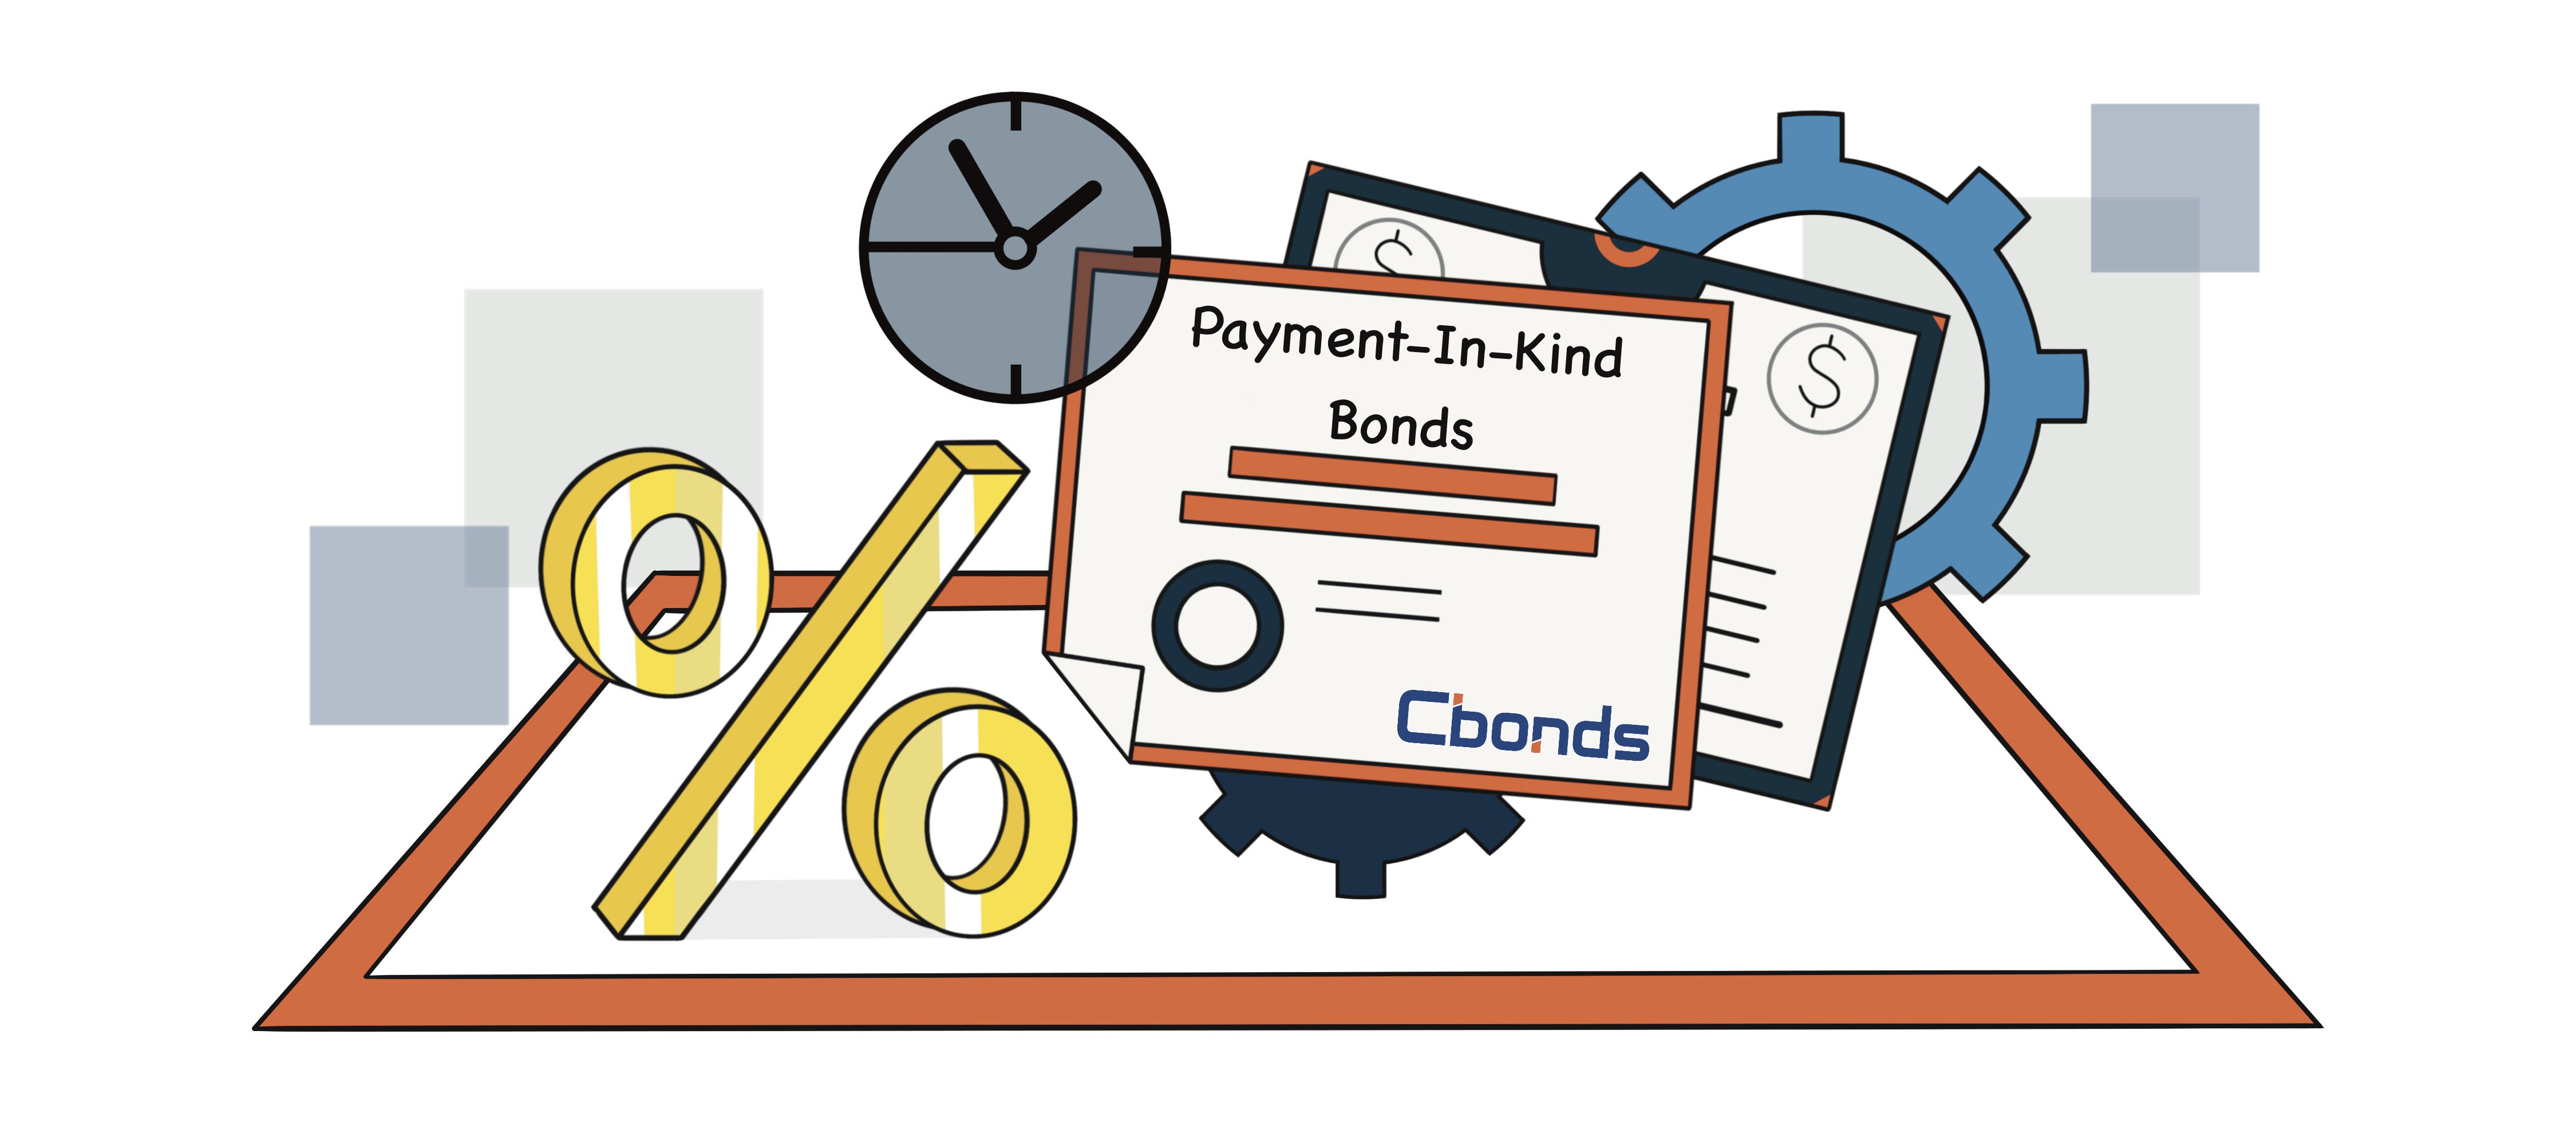 Payment-In-Kind Bonds